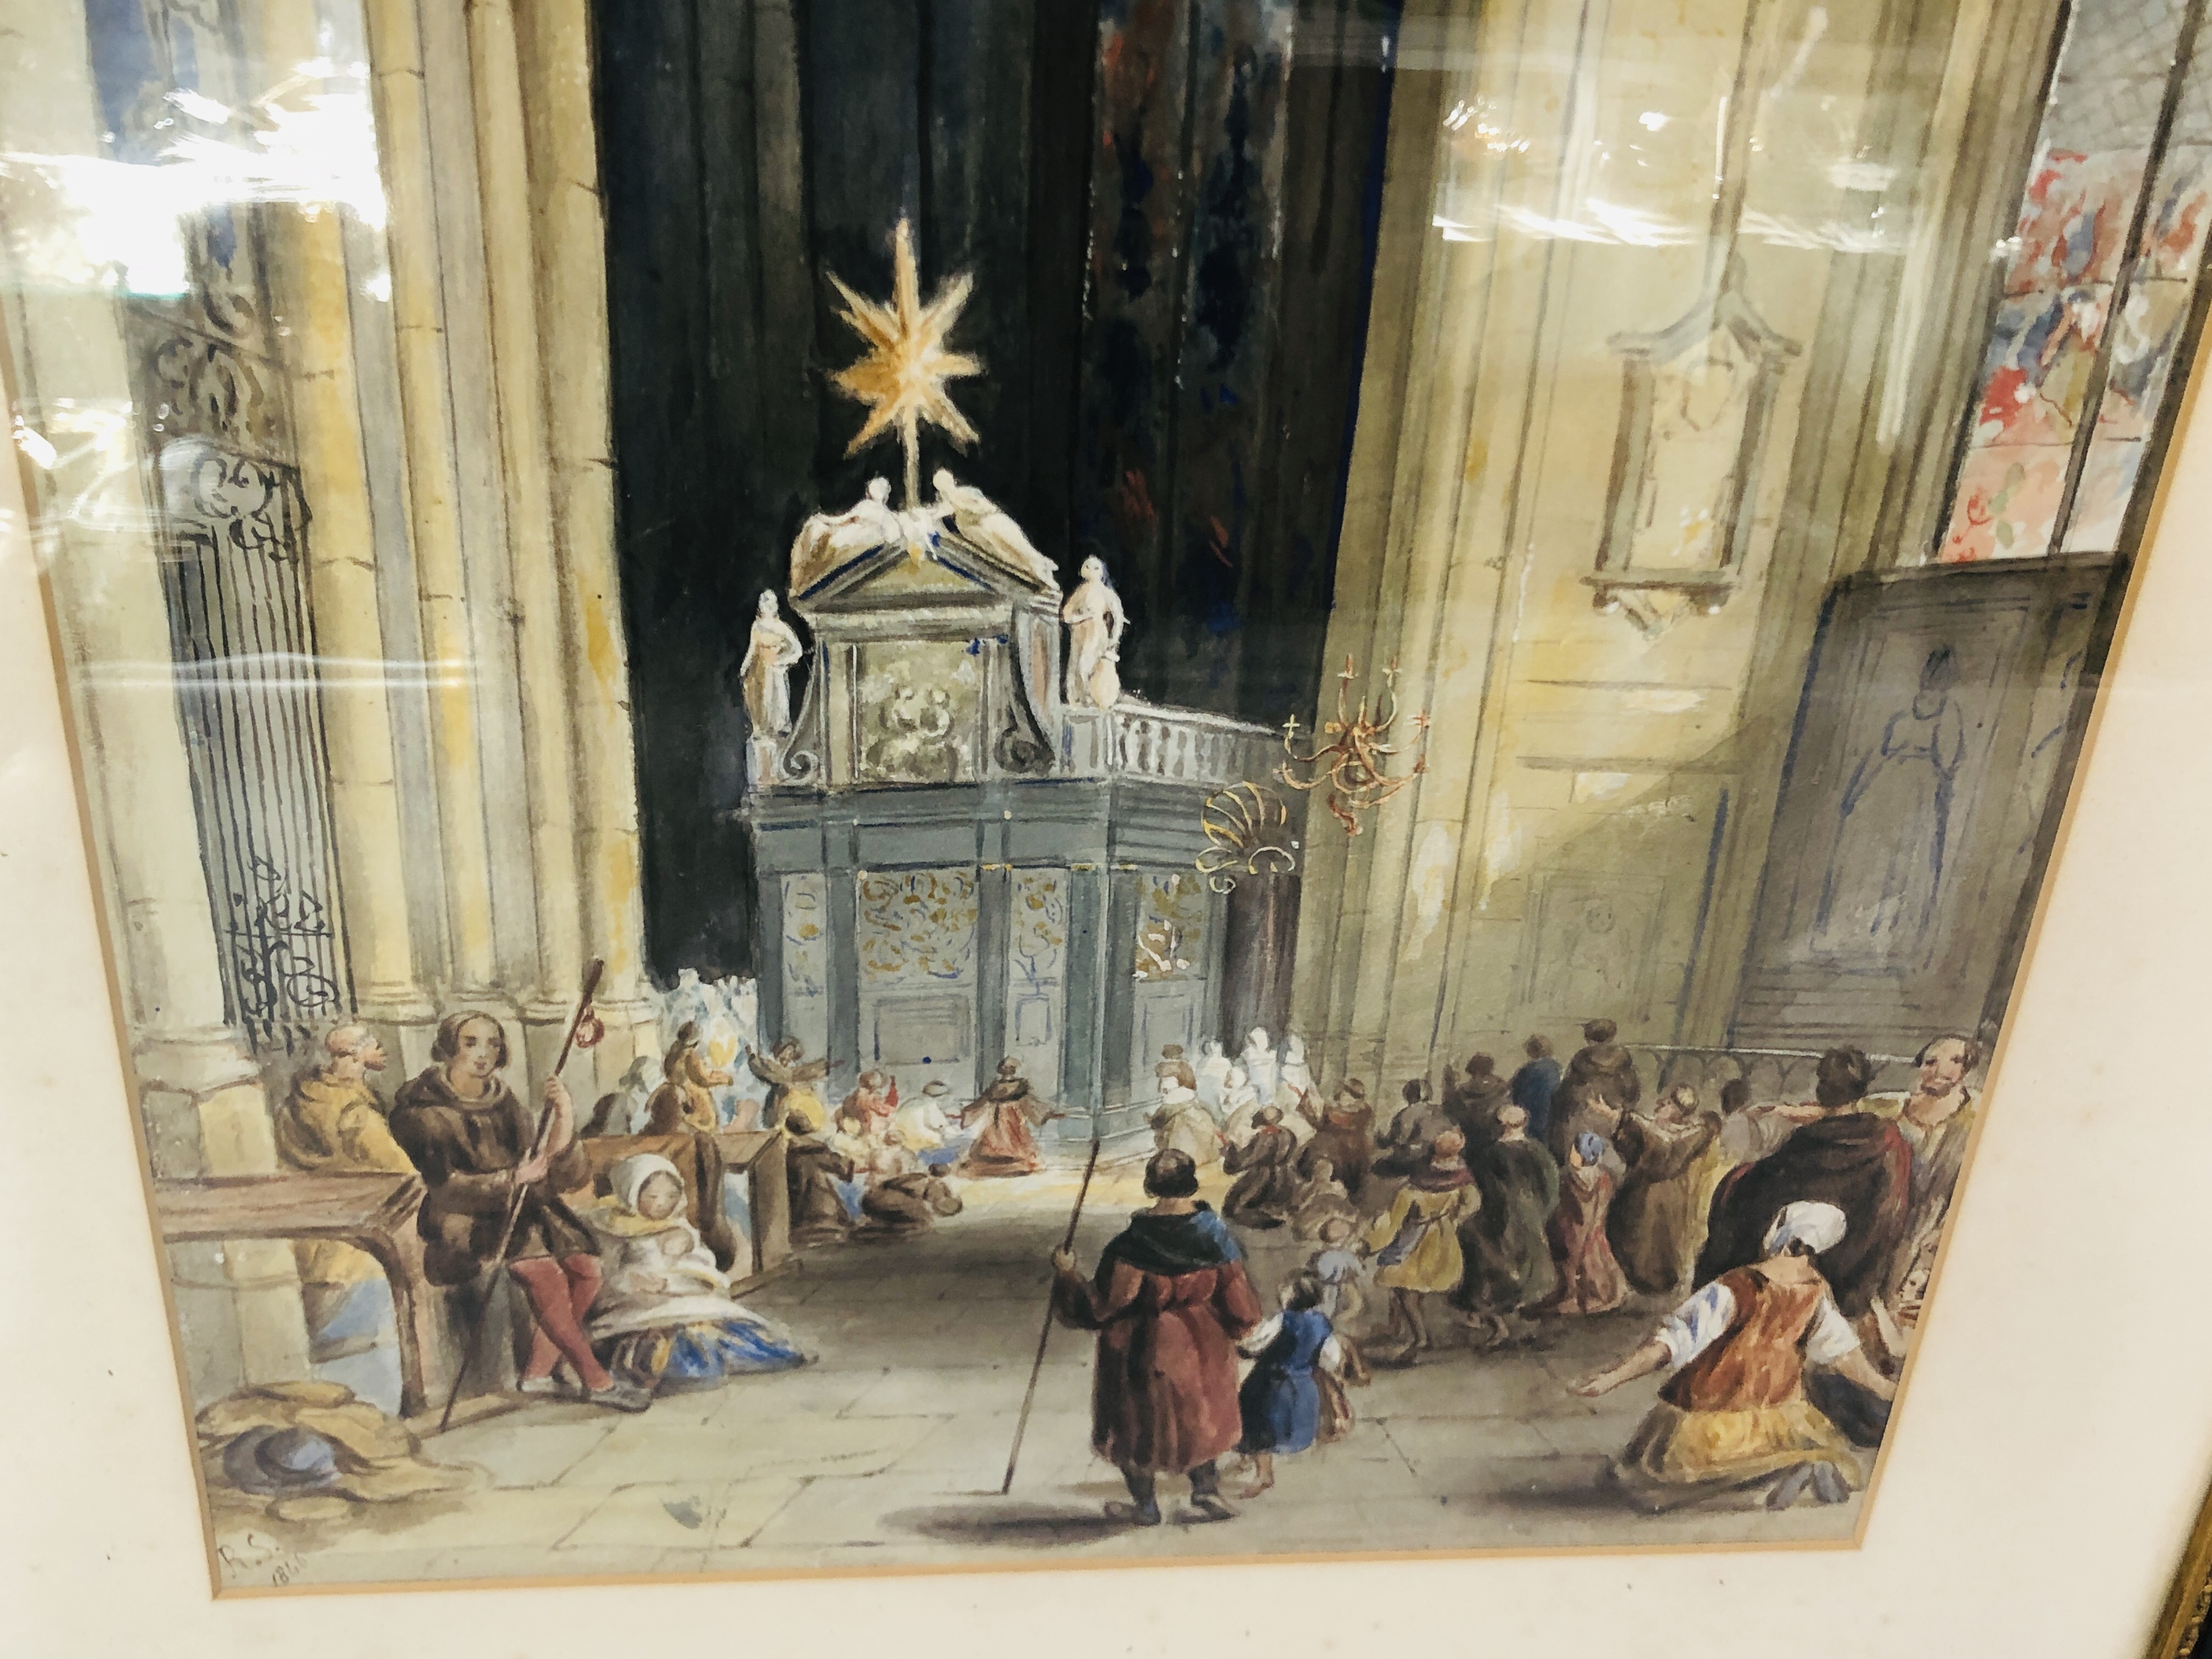 2 FRAMED WATERCOLOURS COLOGNE CATHEDRAL INTERIOR SCENE 45CM X 32CM AND STABLE SCENE 42CM X 32CM - Image 5 of 11